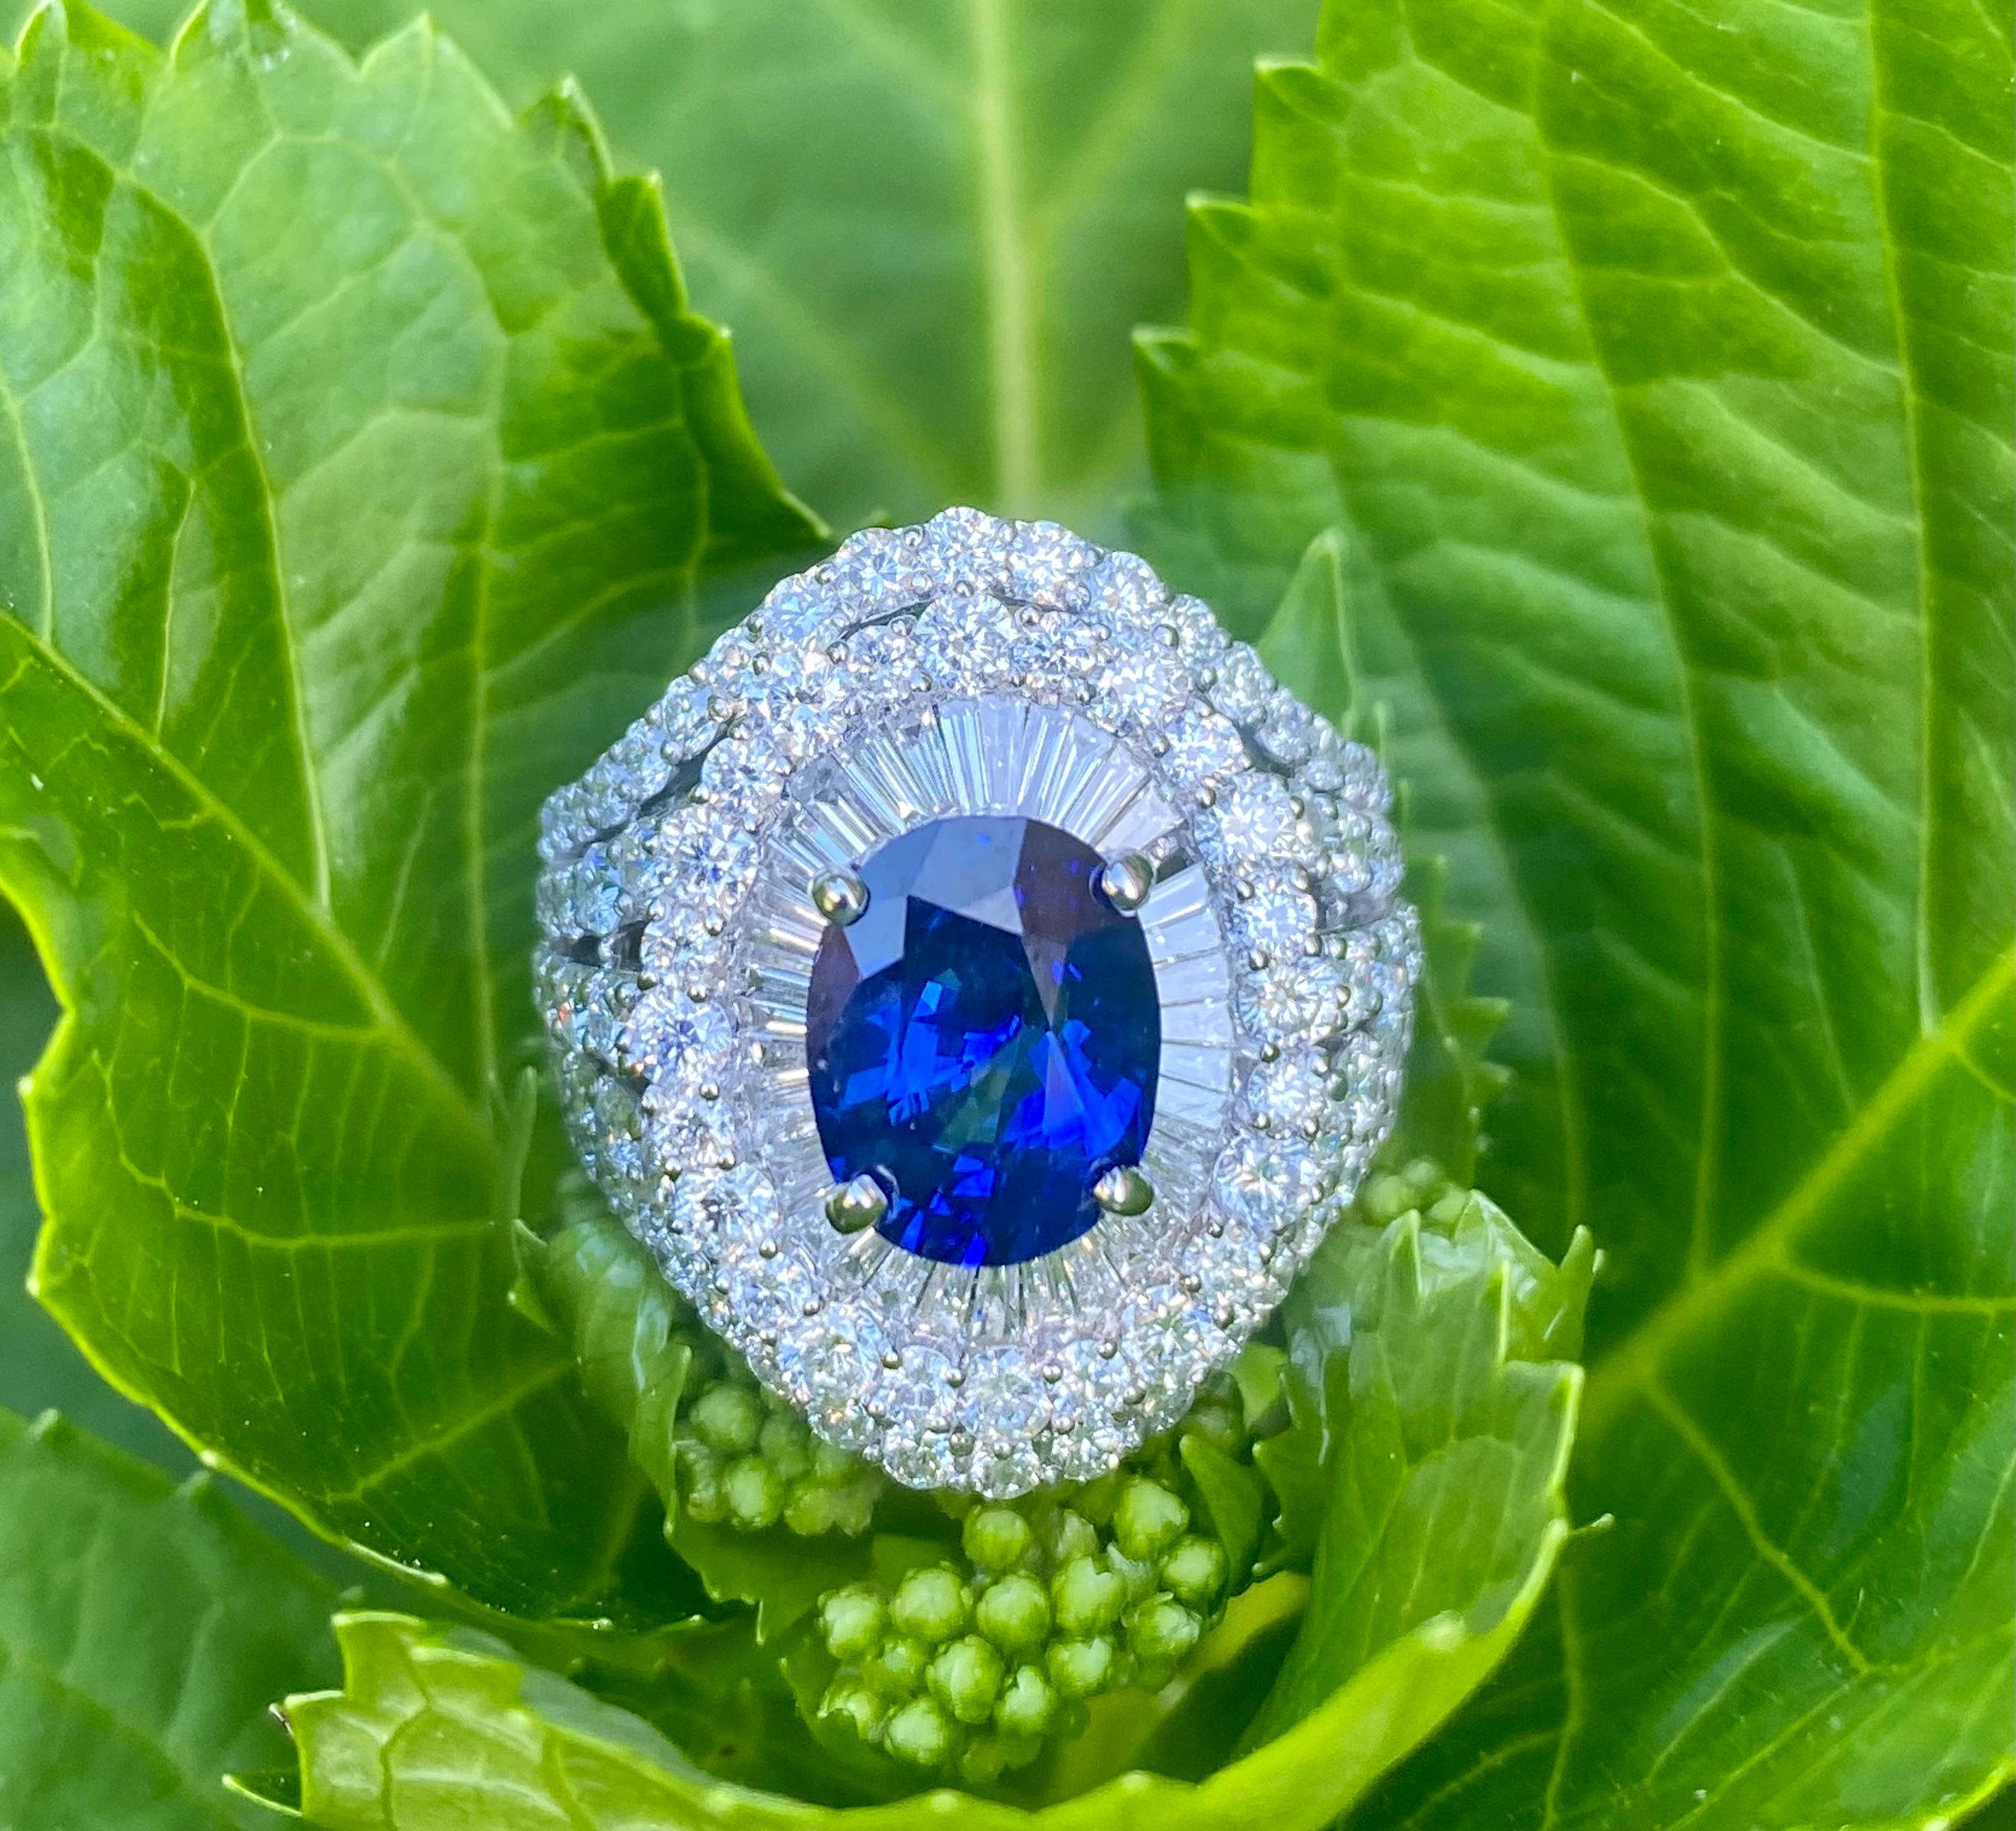 Magnificent estate large oval cut sapphire is prong set in 18 karat white gold and surrounded by prong-set baguette and round brilliant diamonds in a timeless and very elegant cocktail ring setting. The center sapphire is surrounded by baguette